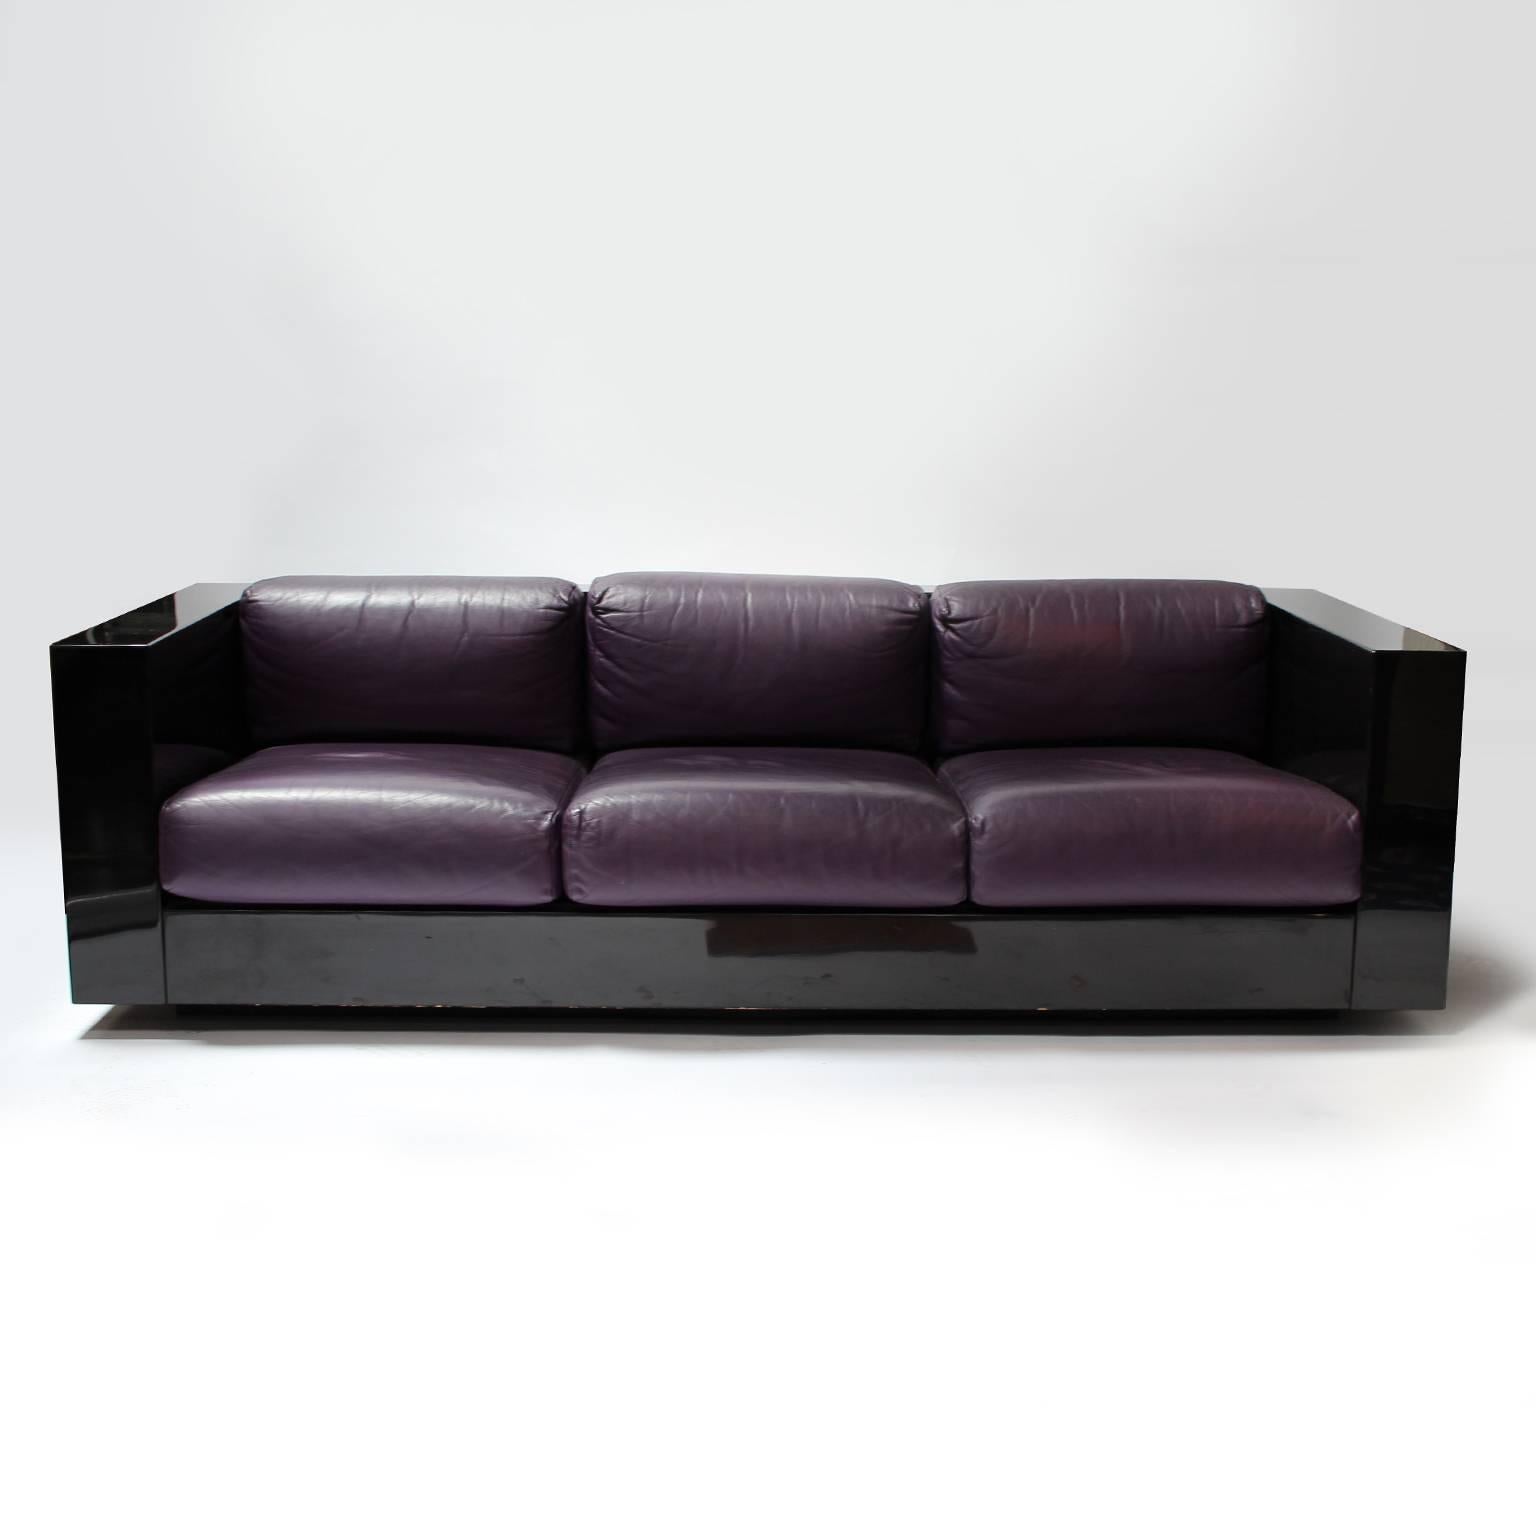 Living room set by Massimo & Lella Vignelli for Poltronova composed of a three-seater sofa, two armchairs and a coffee table.

Black lacquered wood structure with violet leather seats.

Three-seat: W 210 x D 90 x H 61 cm.
Armchair: W 90 x D 90